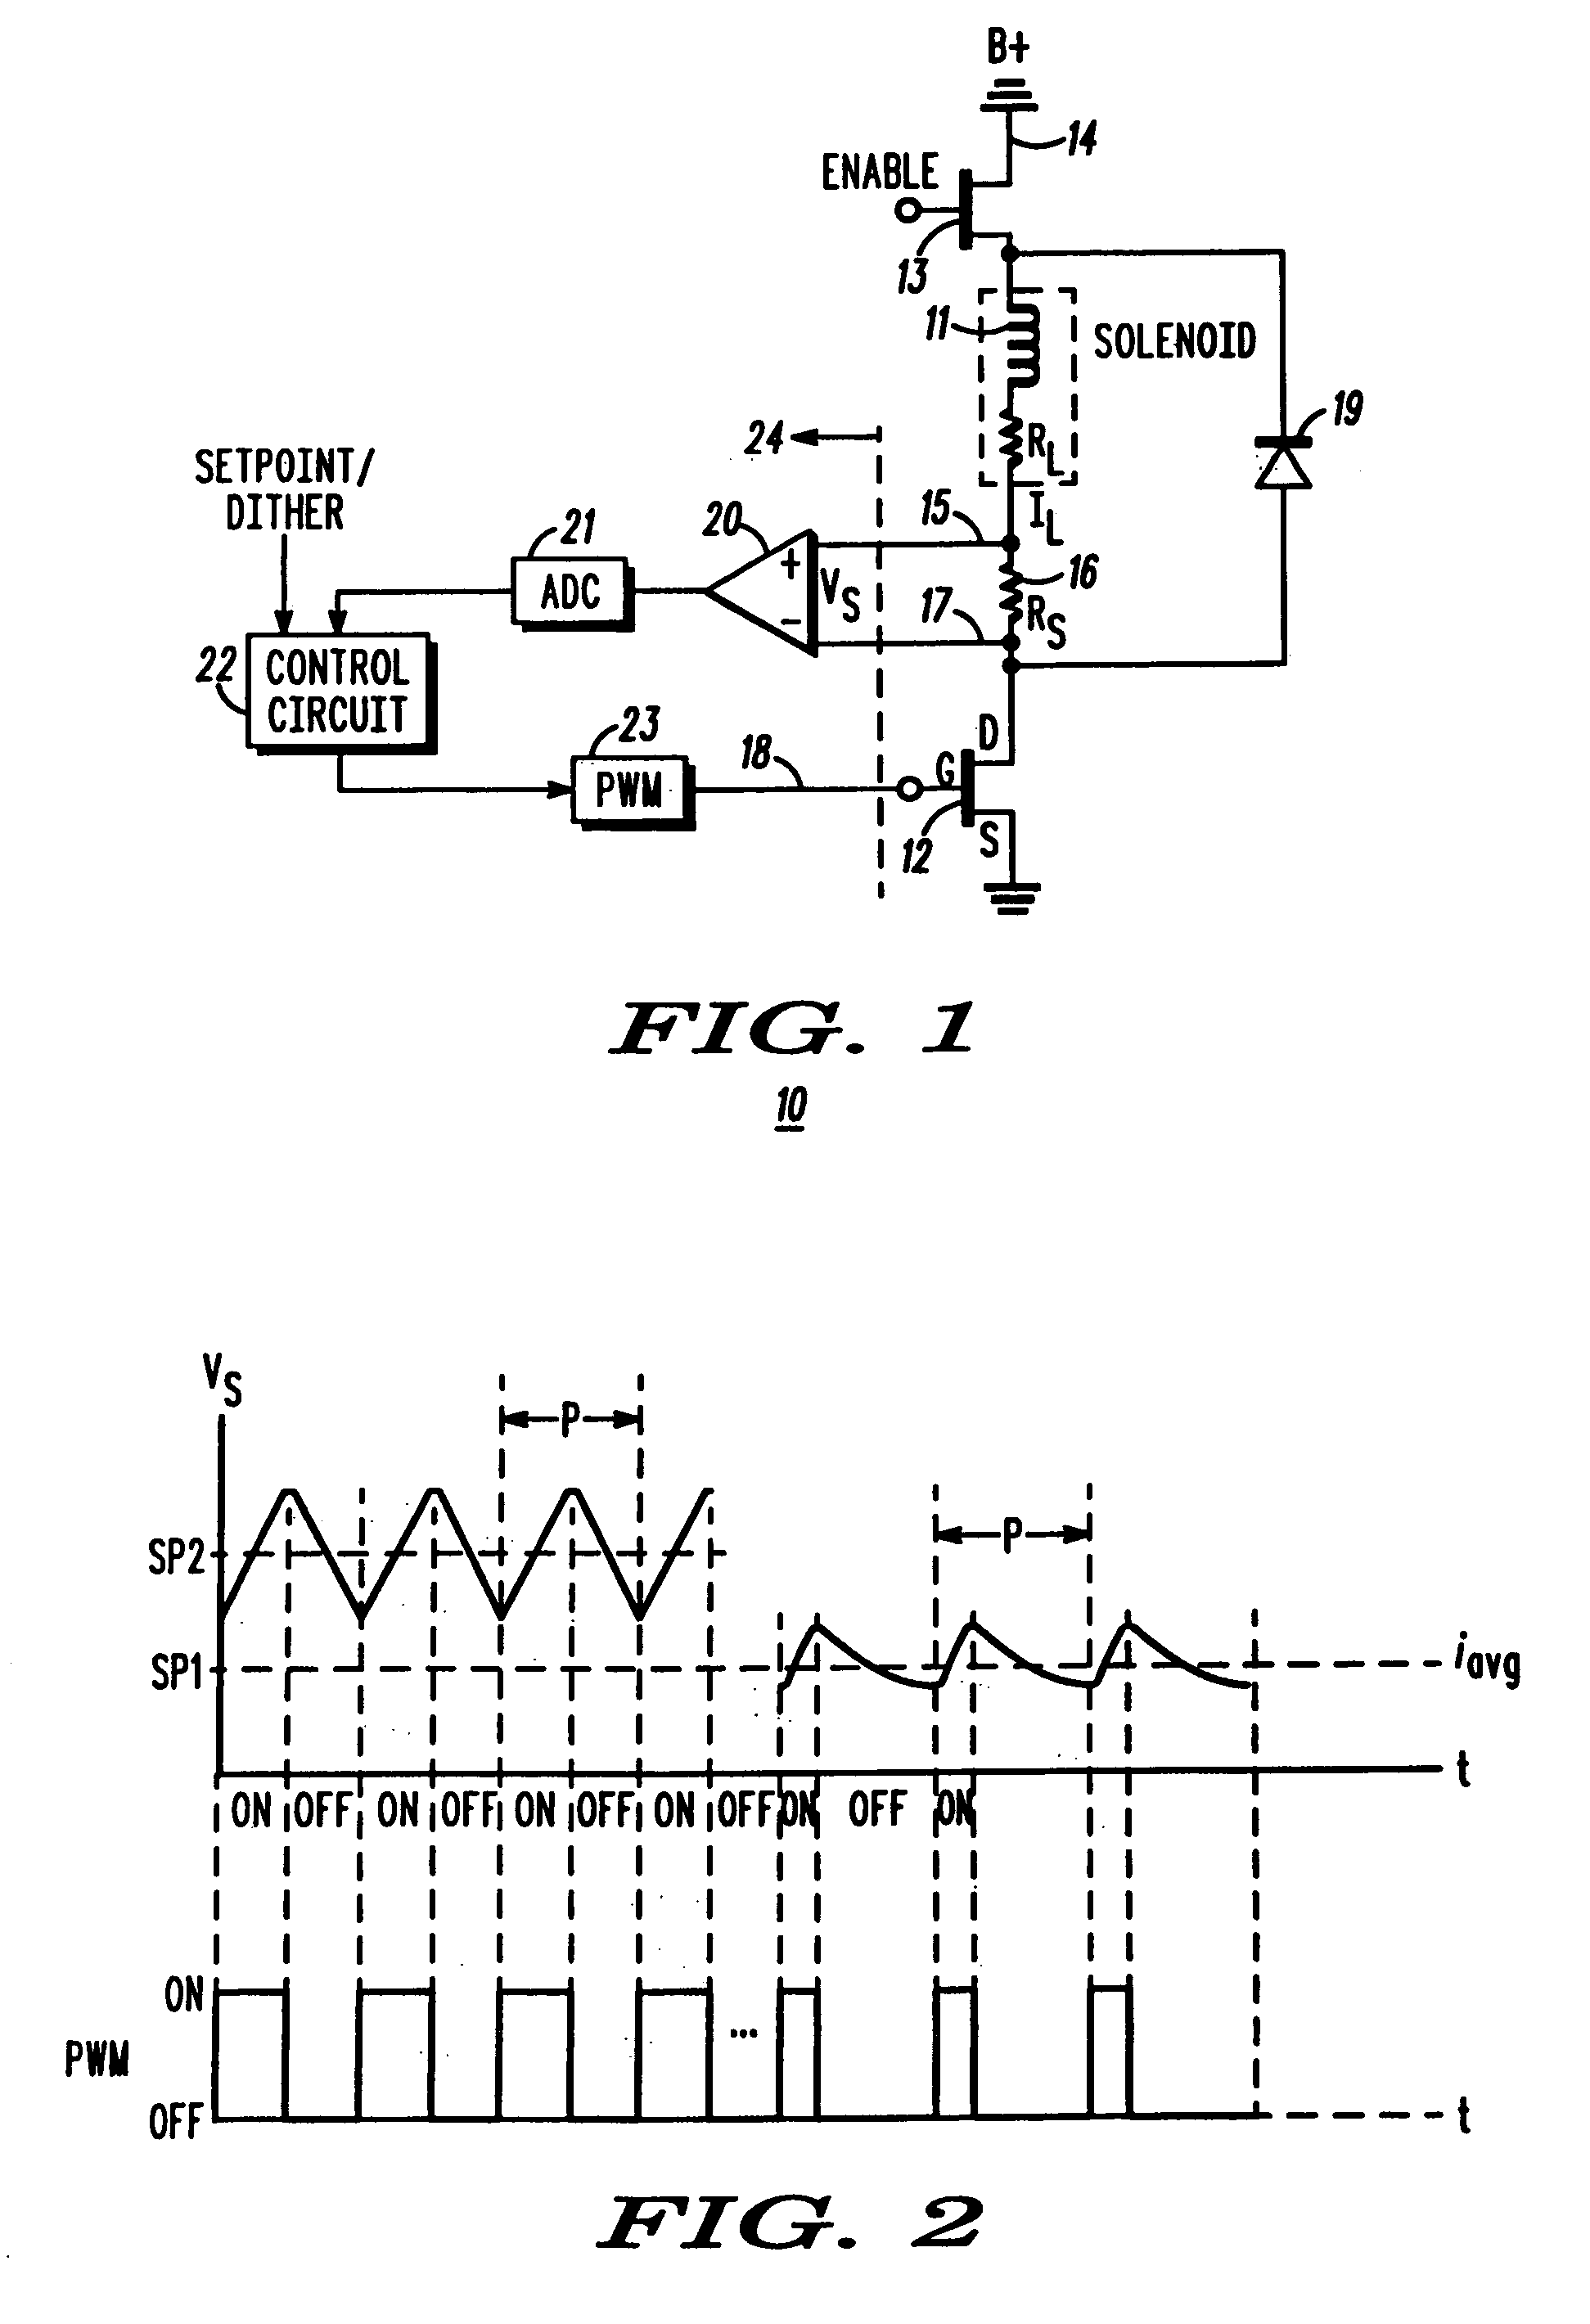 Frequency-controlled load driver for an electromechanical system